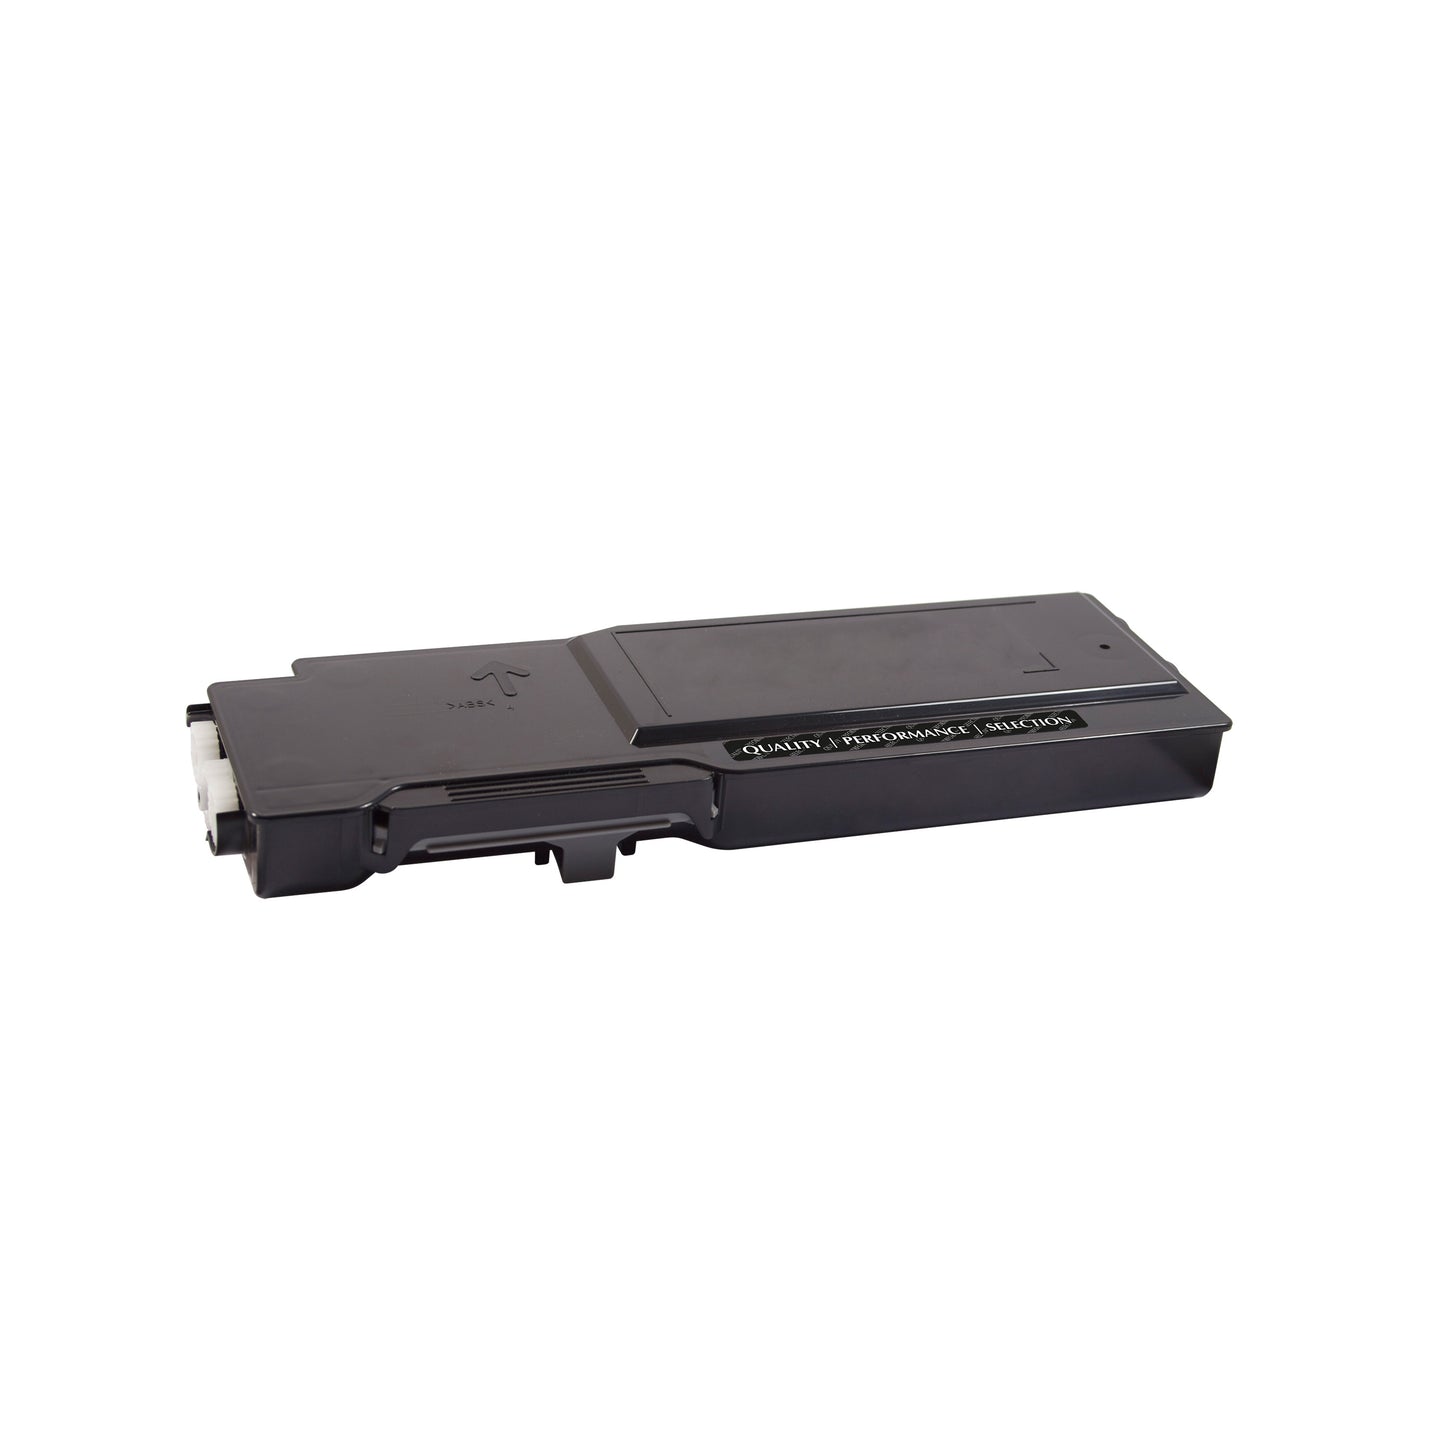 Dell C3760 Remanufactured High Yield Black Toner Cartridge